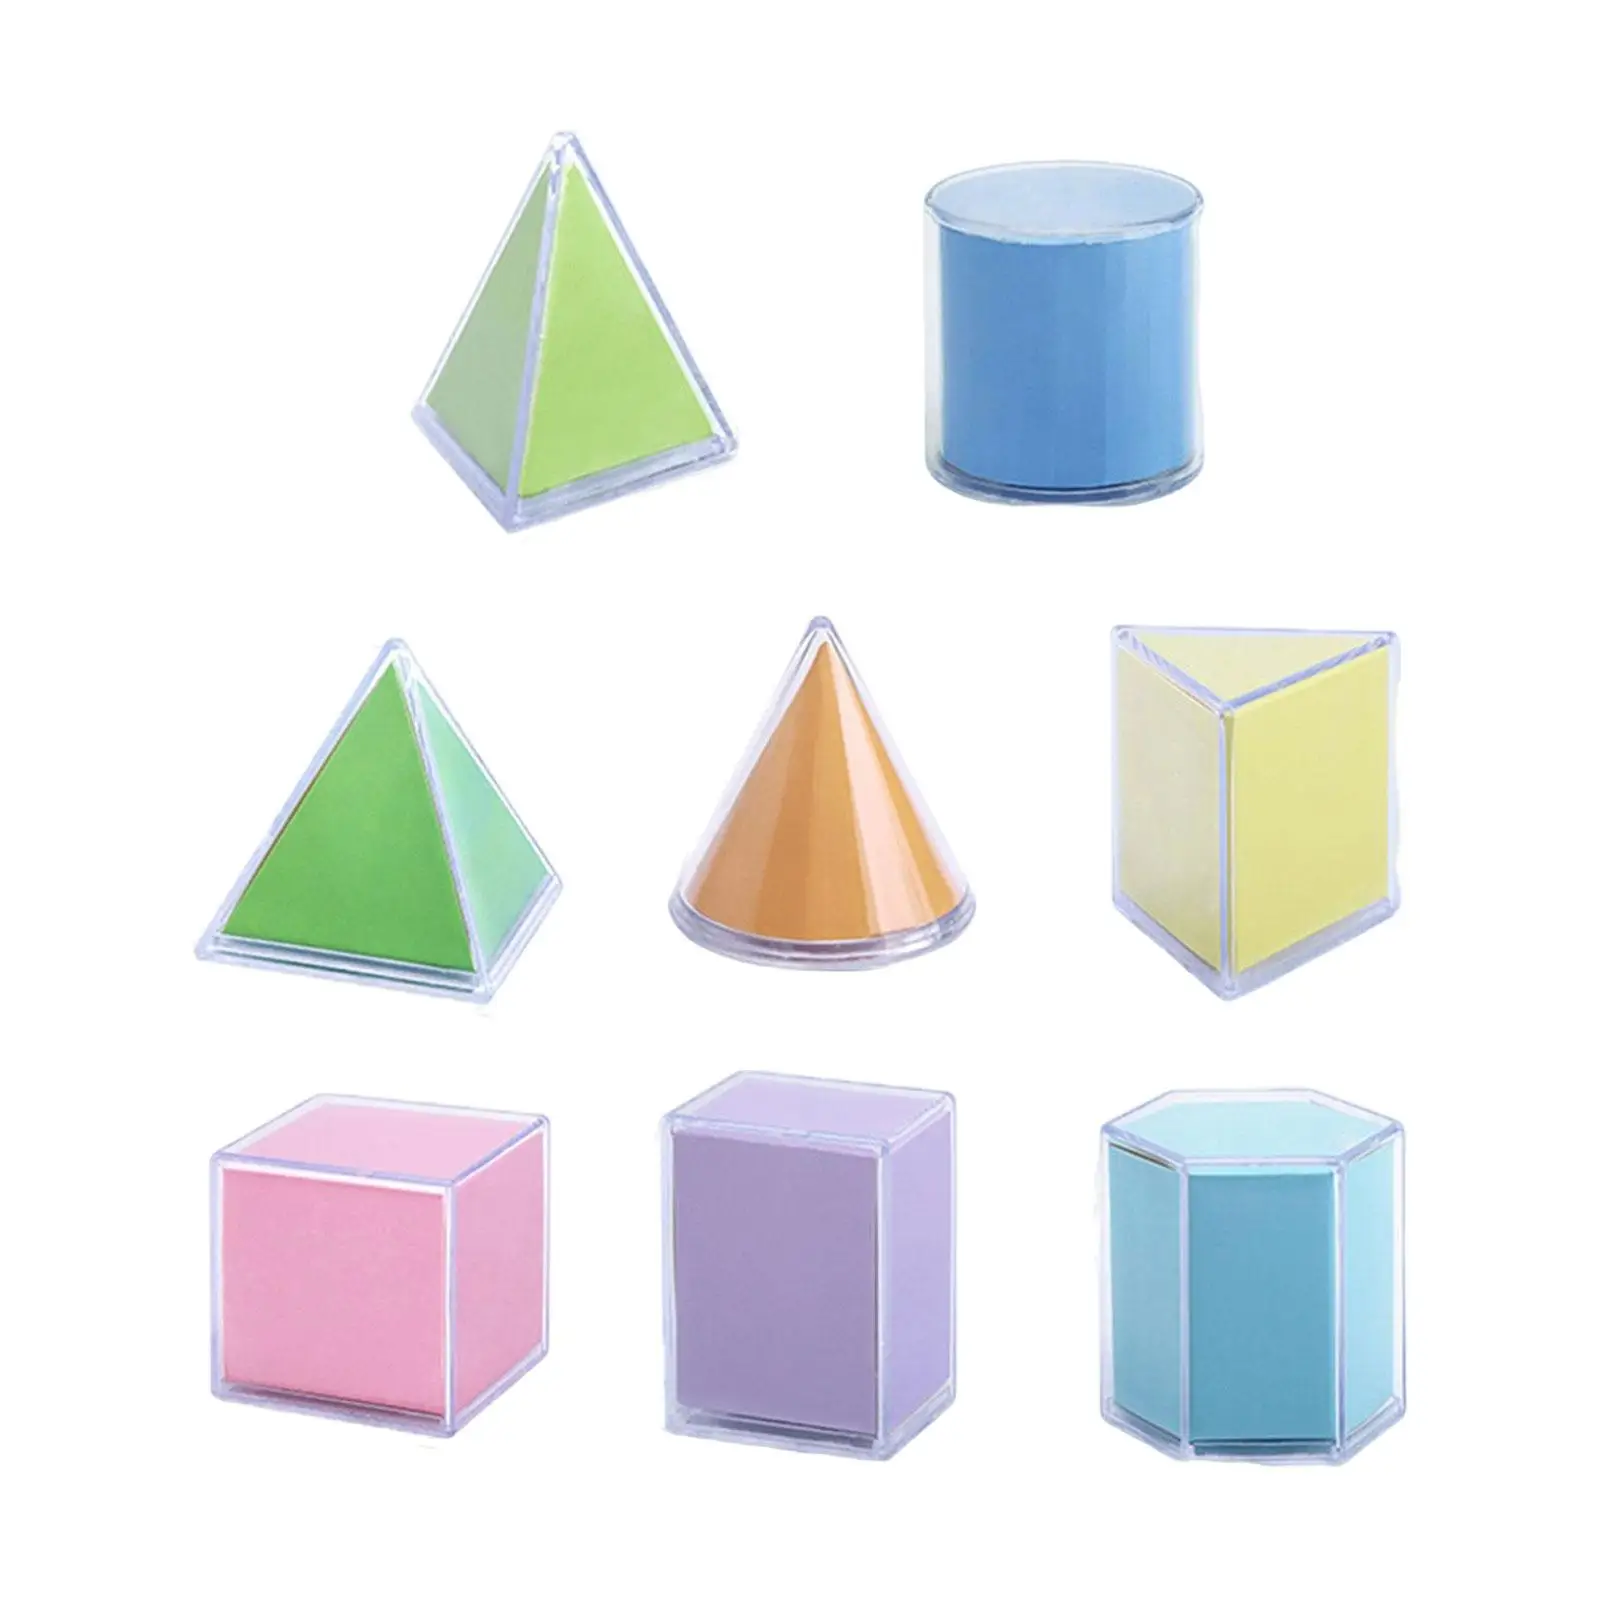 8x 3D Shapes Geometric Shape Sorter Sorting Toy Stacking Game for Babies